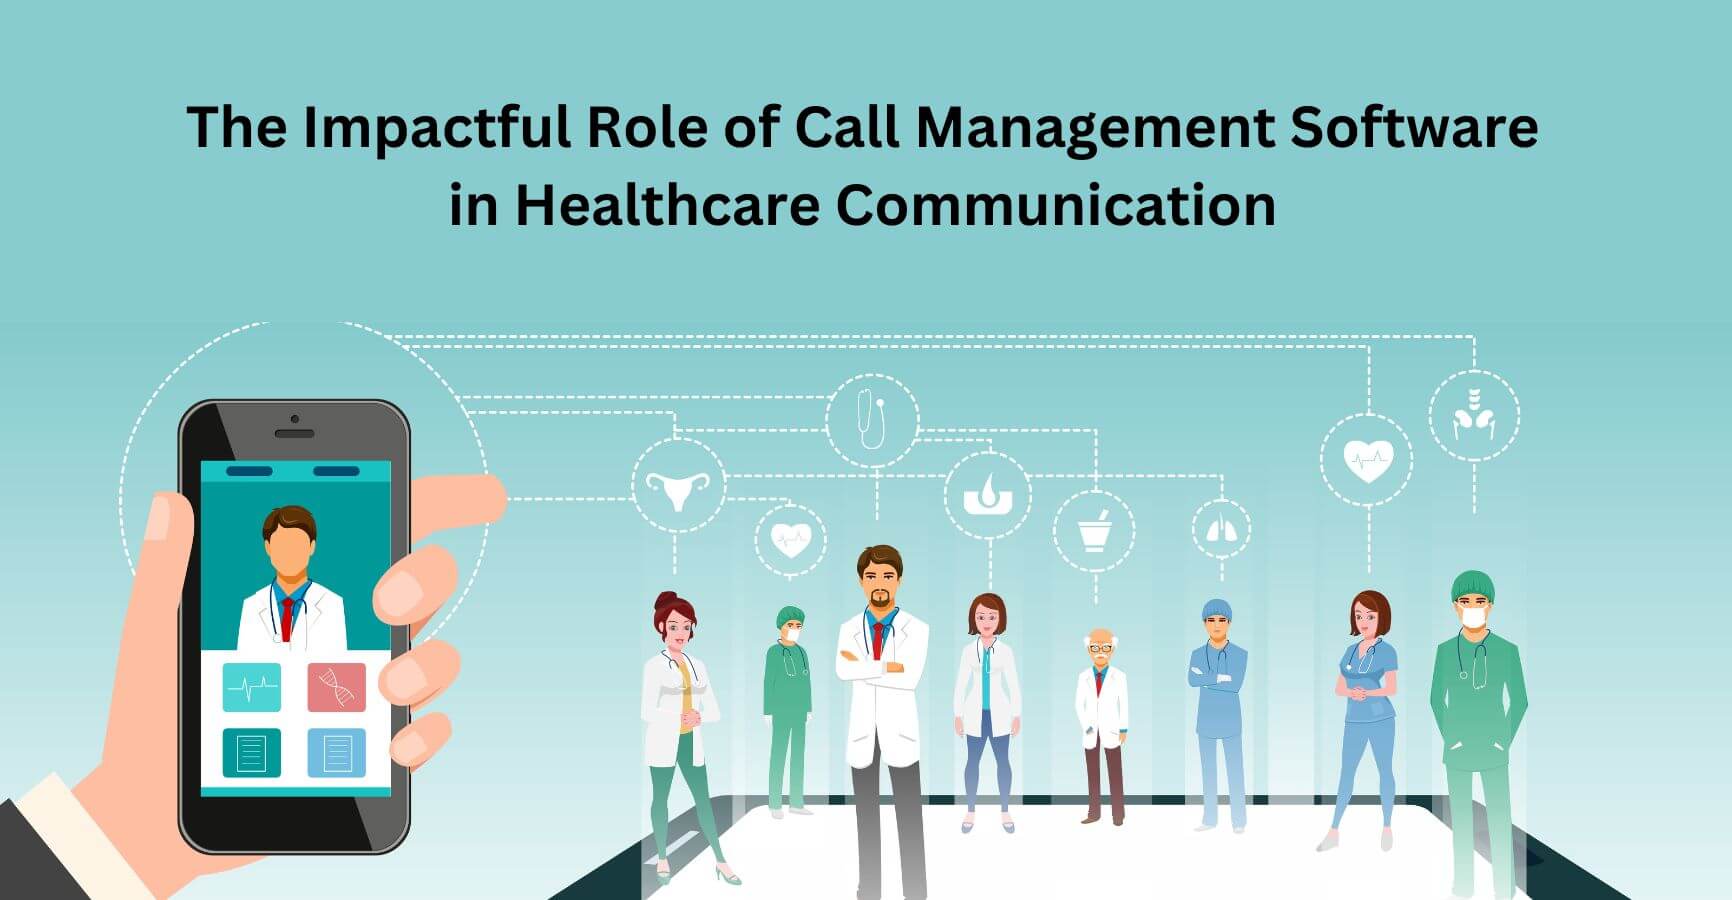 The Impactful Role of Call Management Software in Healthcare Communication